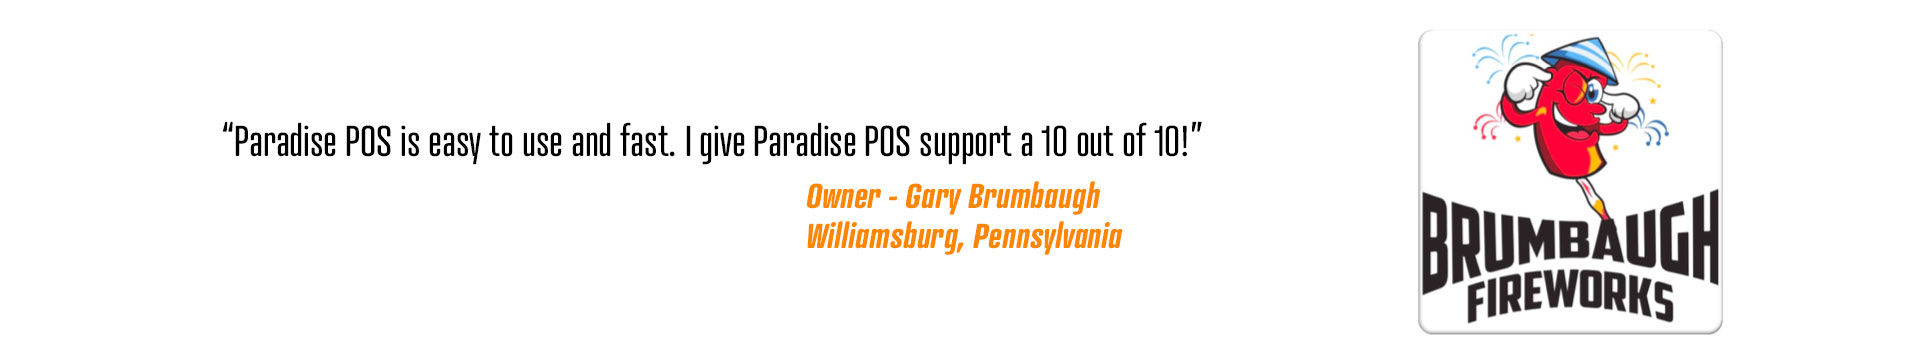 Paradise POS is easy to use and fast. I give Paradise POS support a 10 out of 10!